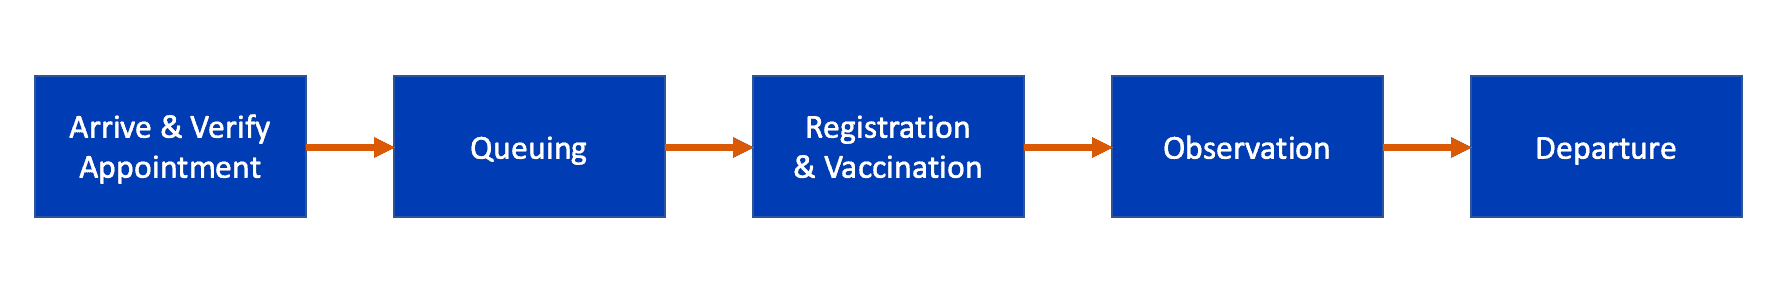 High level schematic flow of vaccination clinic